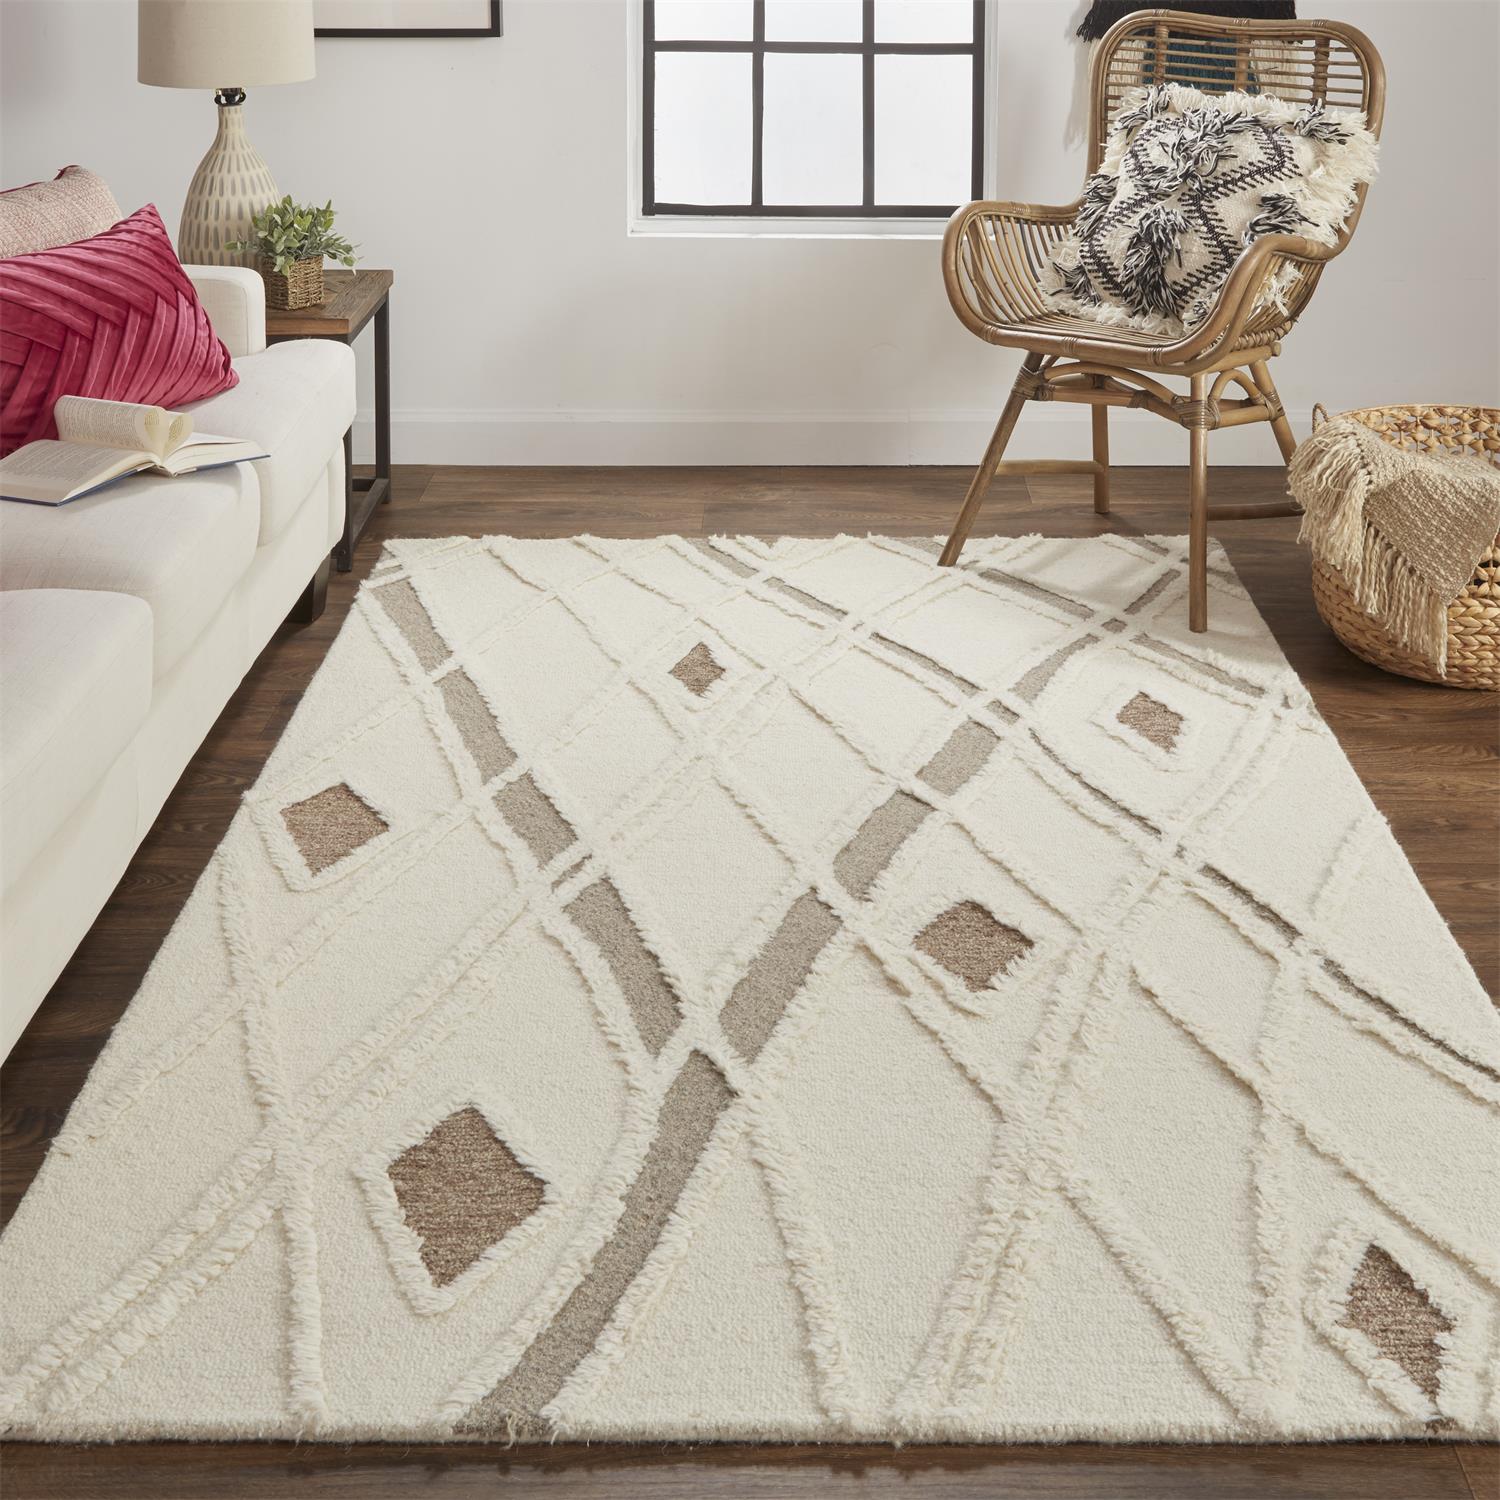 Feizy Anica 8008F Ivory/Beige Area Rug